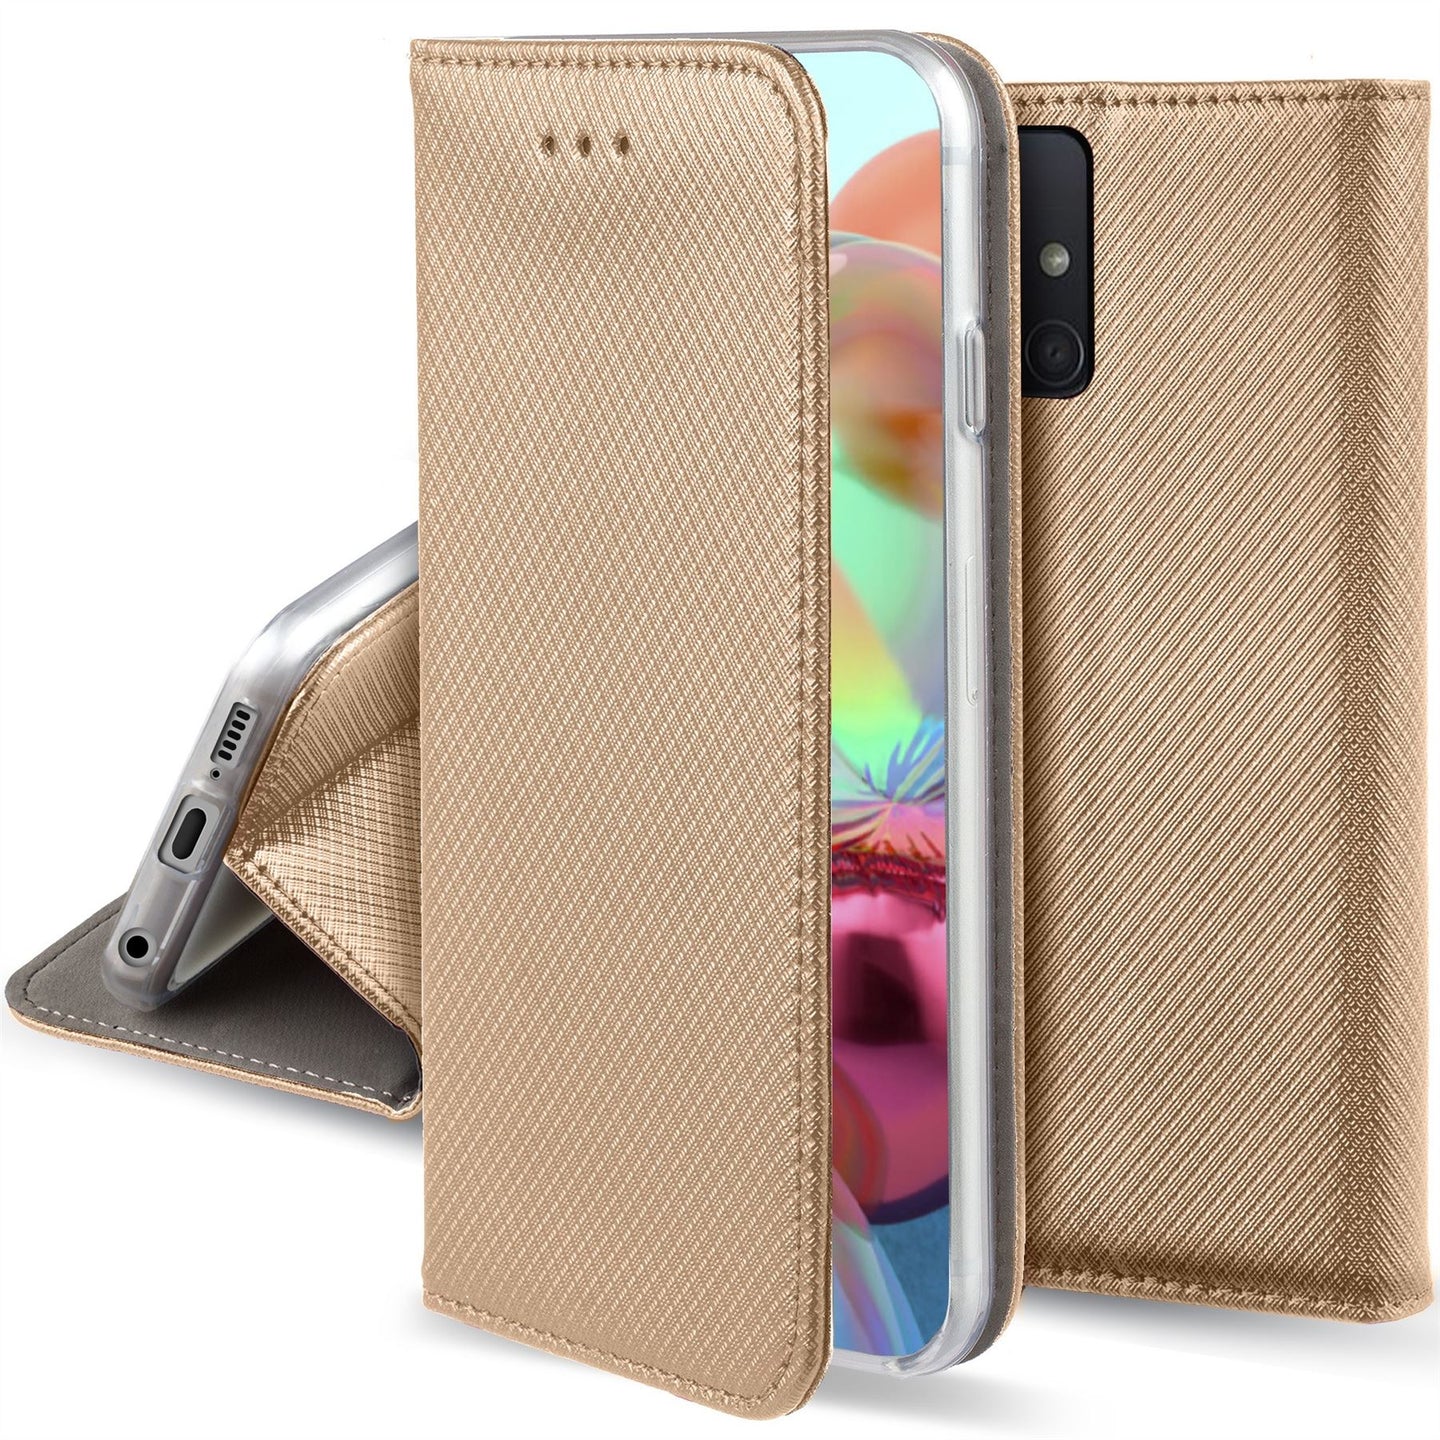 Moozy Case Flip Cover for Samsung A71, Gold - Smart Magnetic Flip Case with Card Holder and Stand